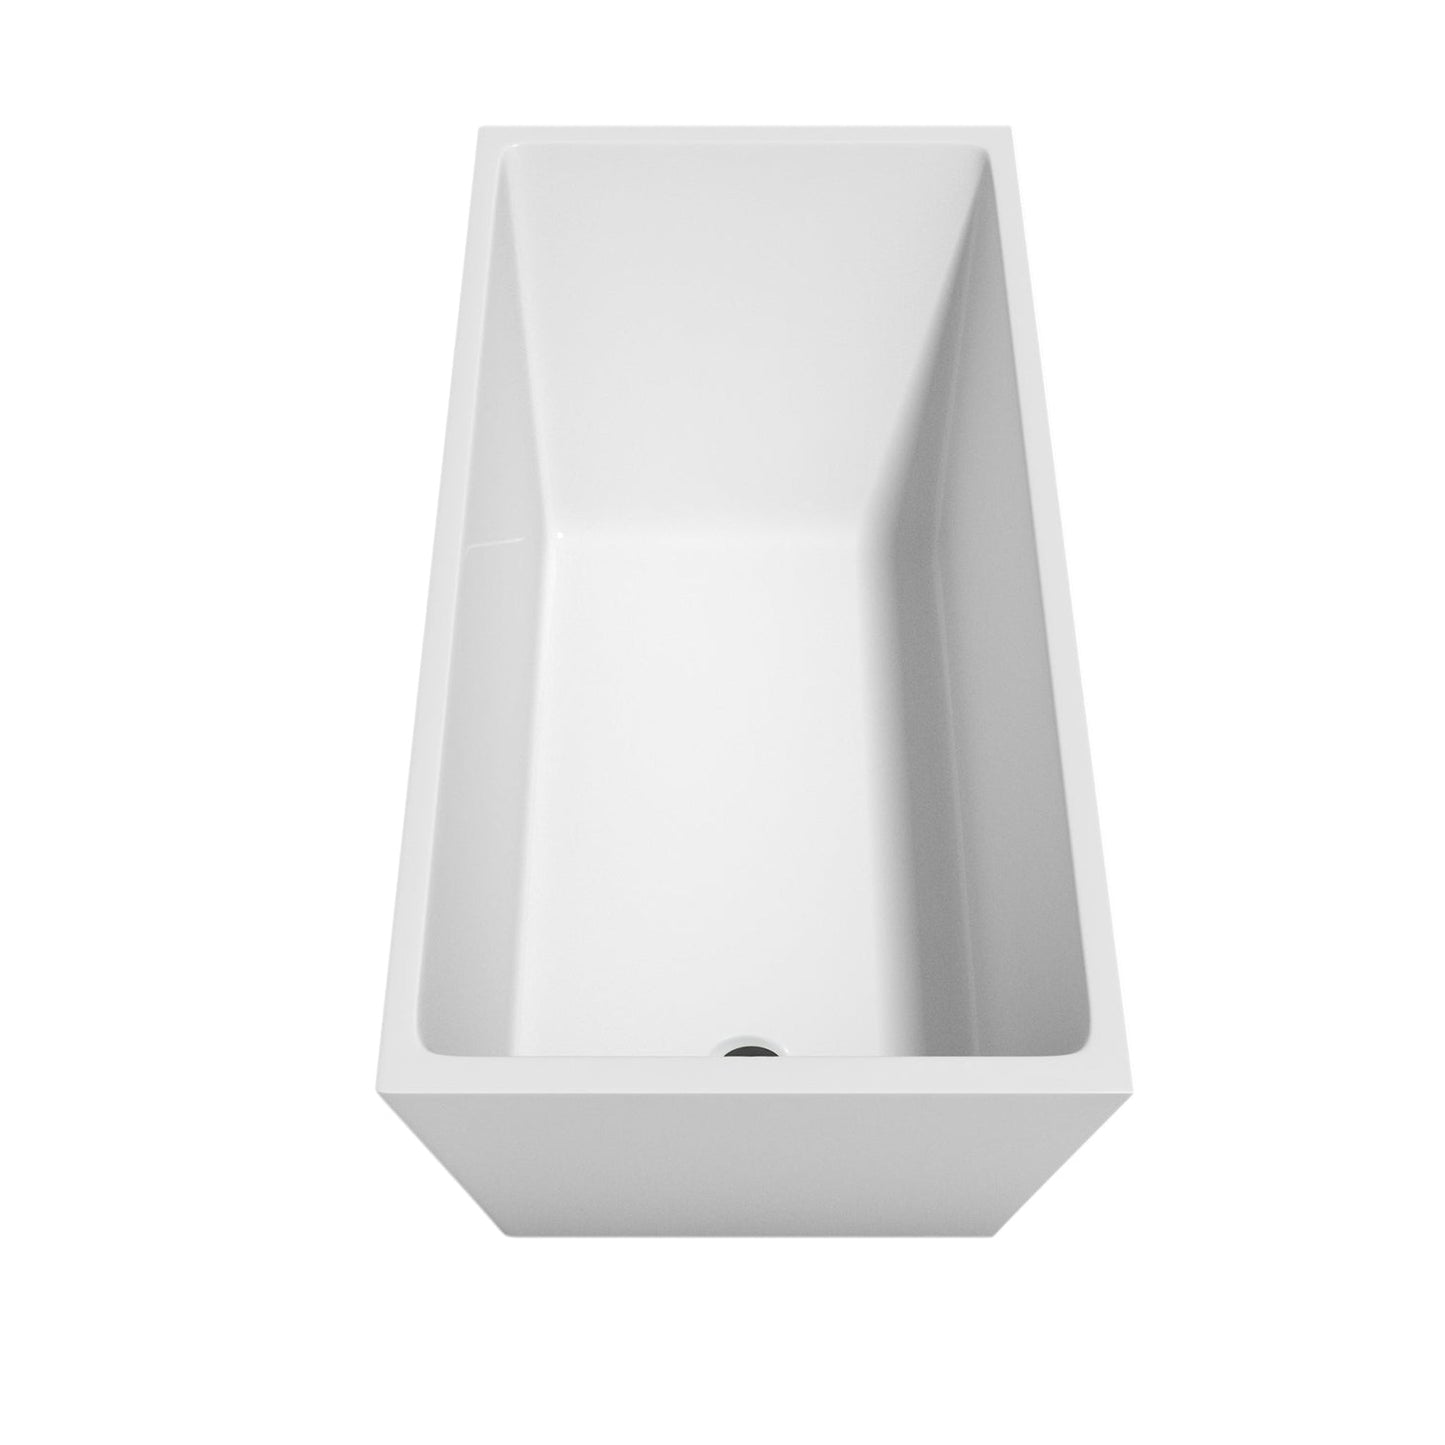 Wyndham Collection Hannah 59" Freestanding Bathtub in White With Floor Mounted Faucet, Drain and Overflow Trim in Matte Black